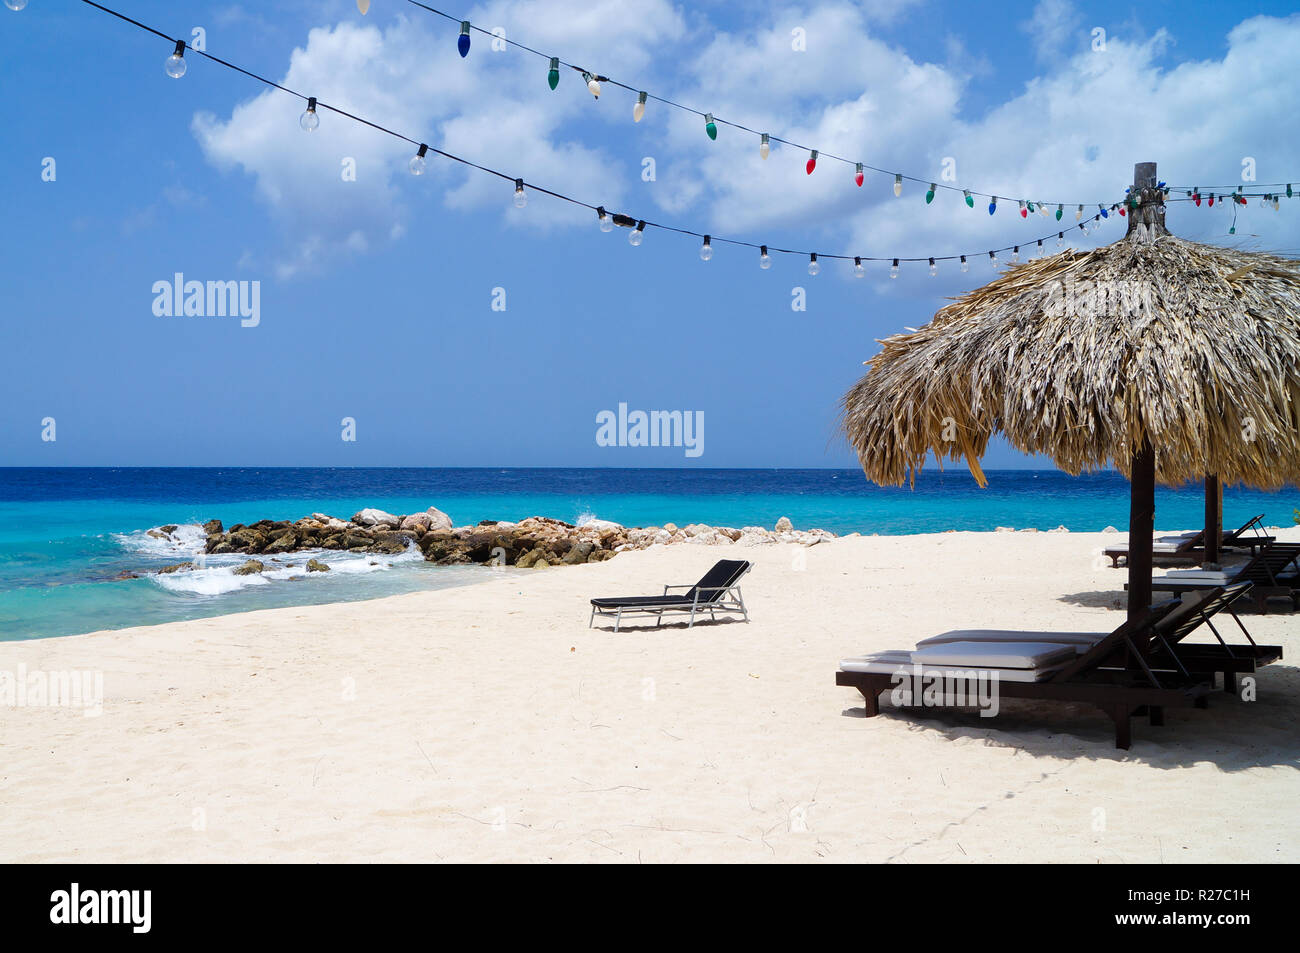 Tiki hut on the beach with white sand, blue water and colorful lights. Paradise on Curacao. Stock Photo